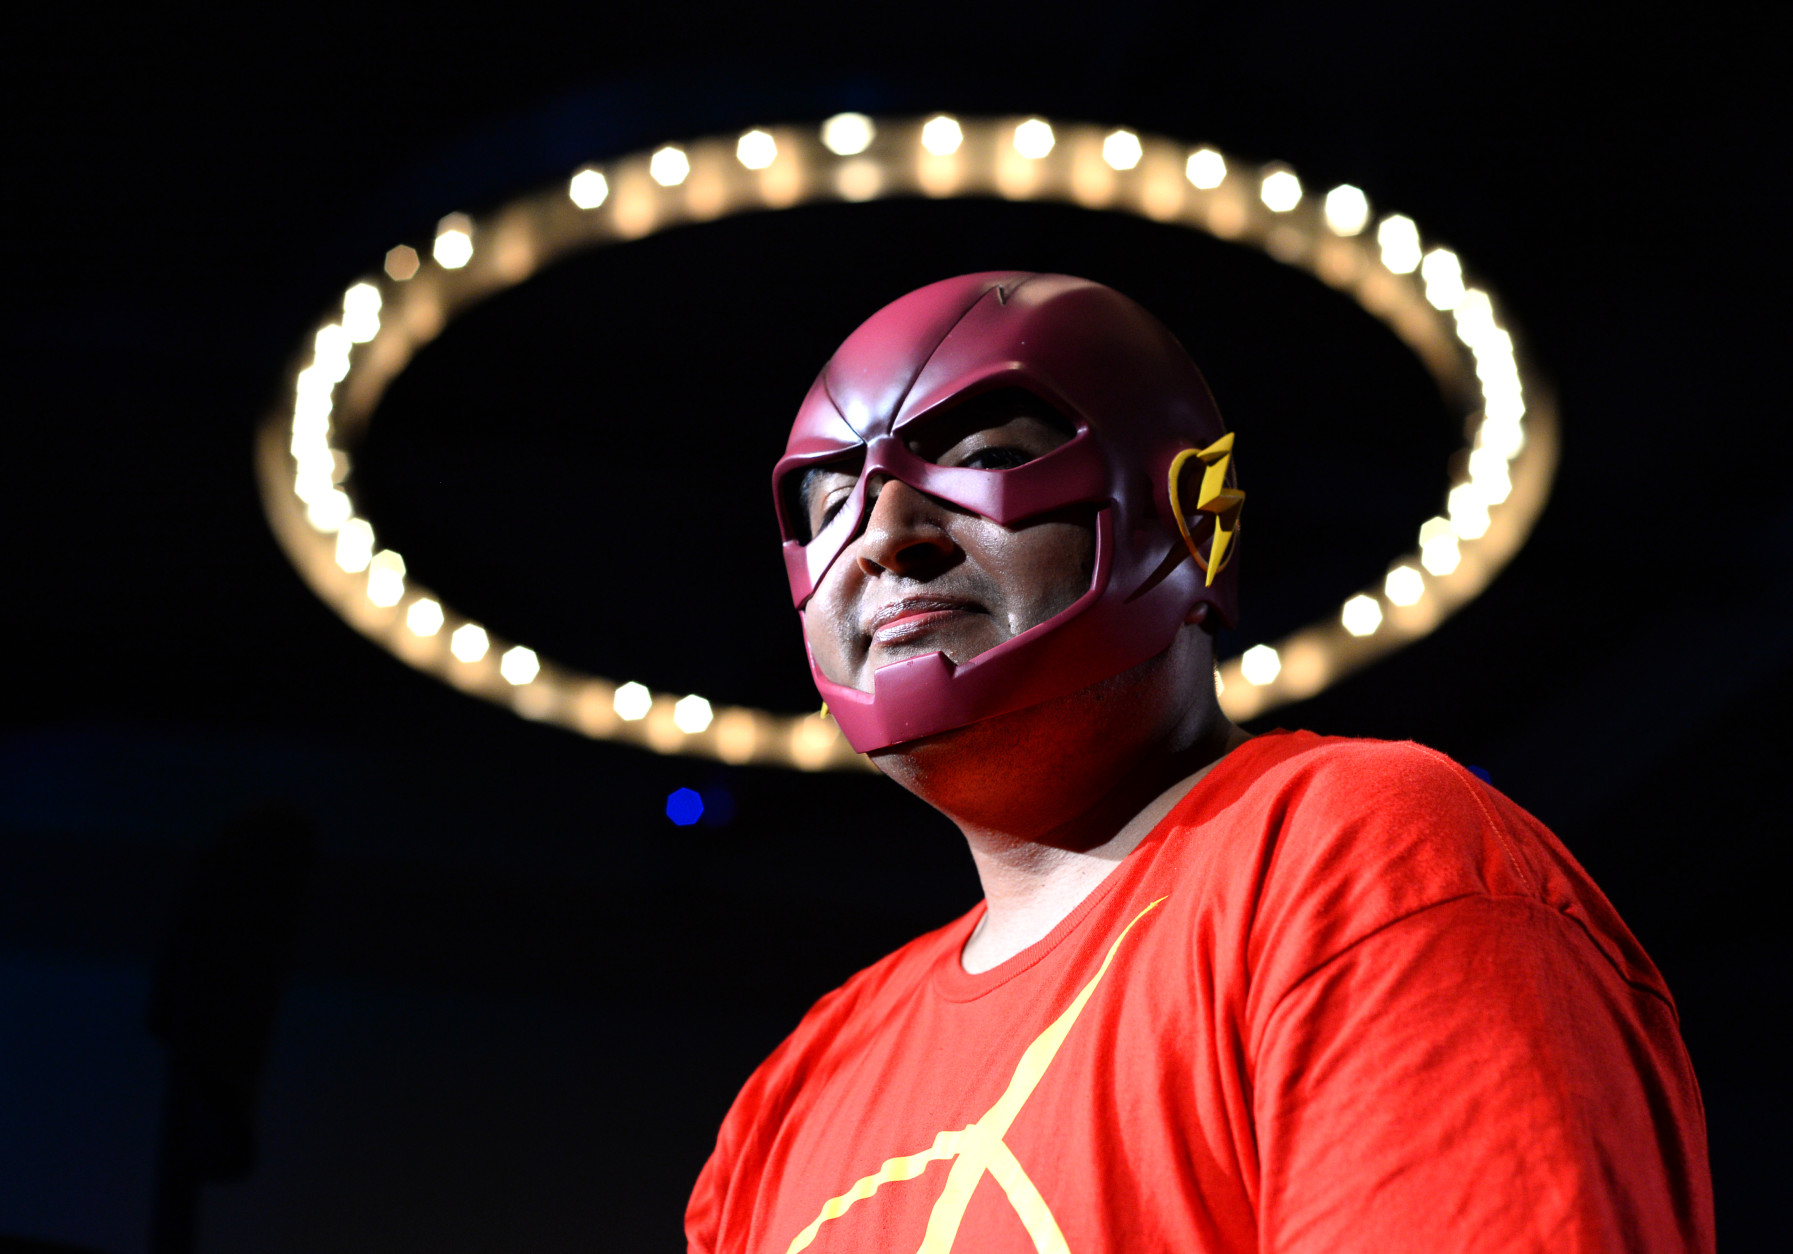 Fan dressed as the Flash stands in line to ask a question during the Q and A at "The Flash" panel on day 3 of Comic-Con International on Saturday, July 23, 2016, in San Diego. (Photo by Al Powers/Invision/AP)